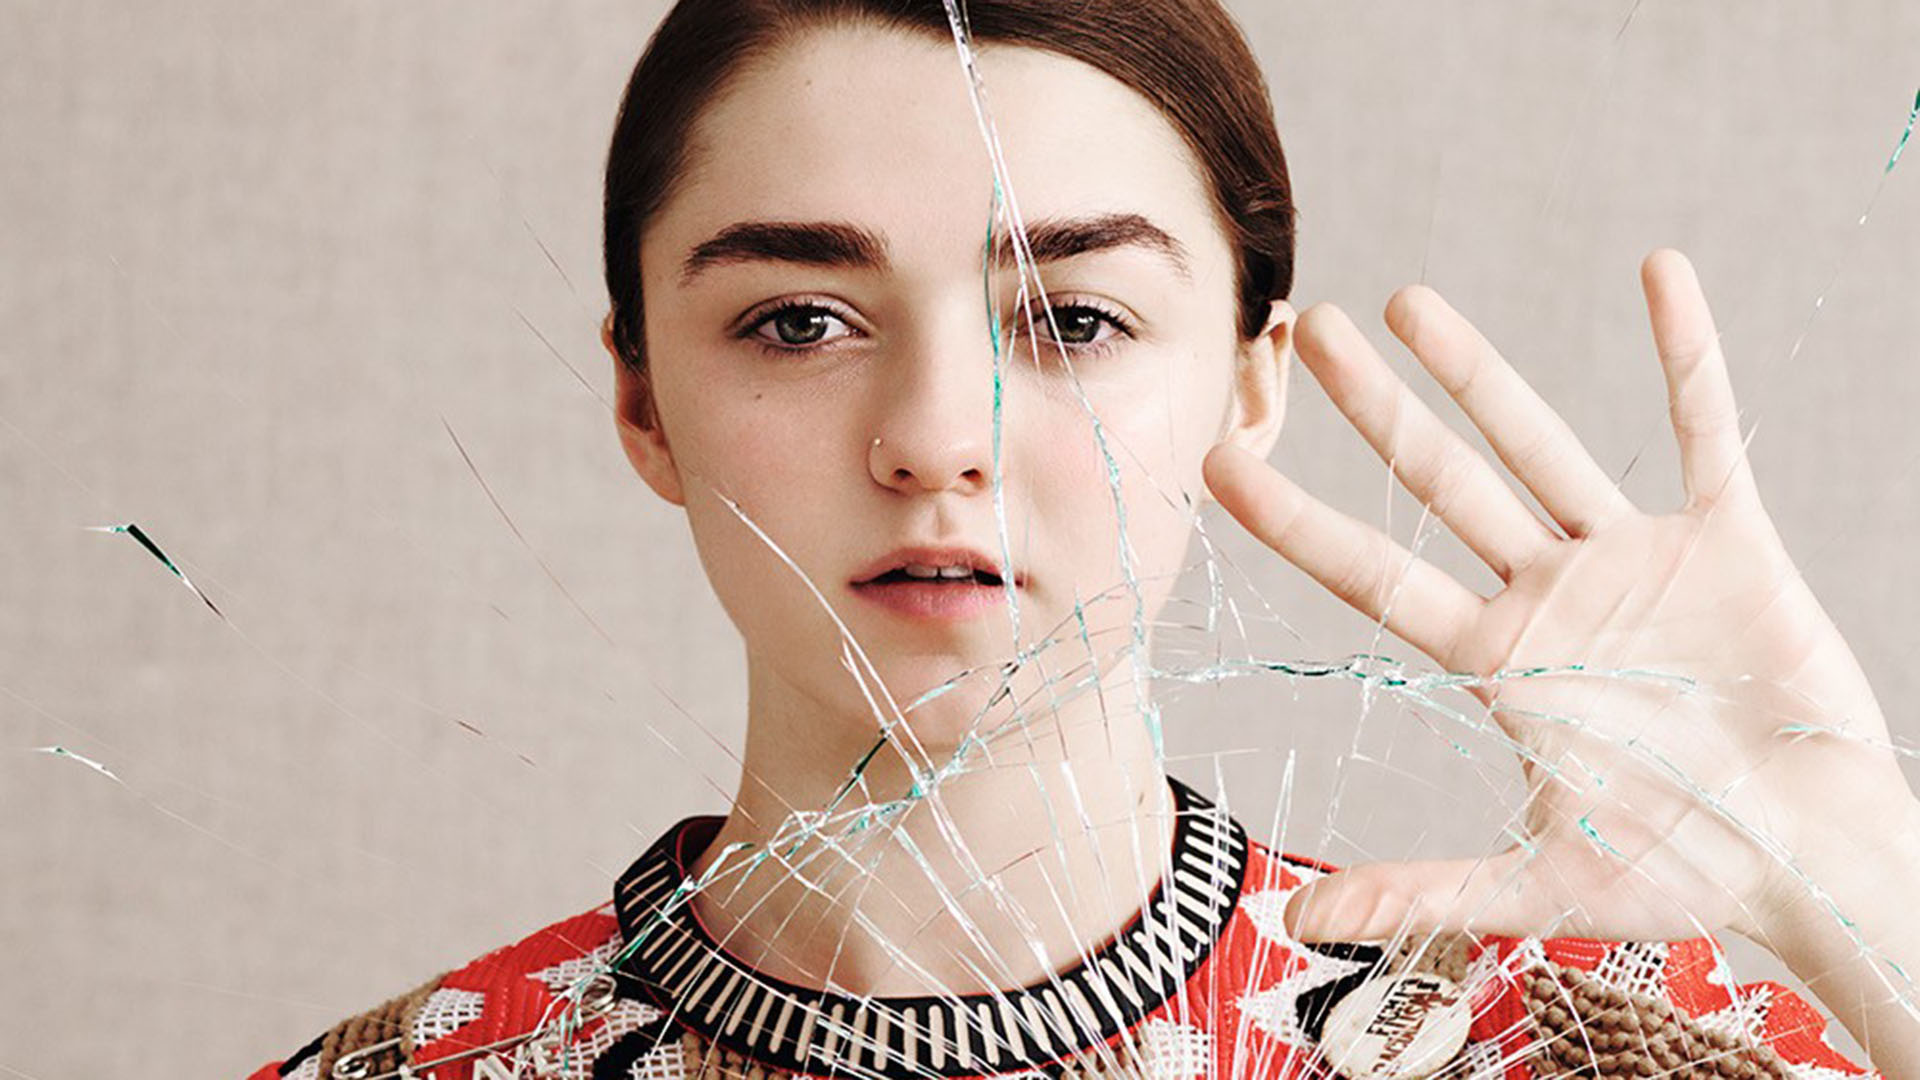 Maisie Williams, High resolution wallpapers, Quality, Download, 1920x1080 Full HD Desktop